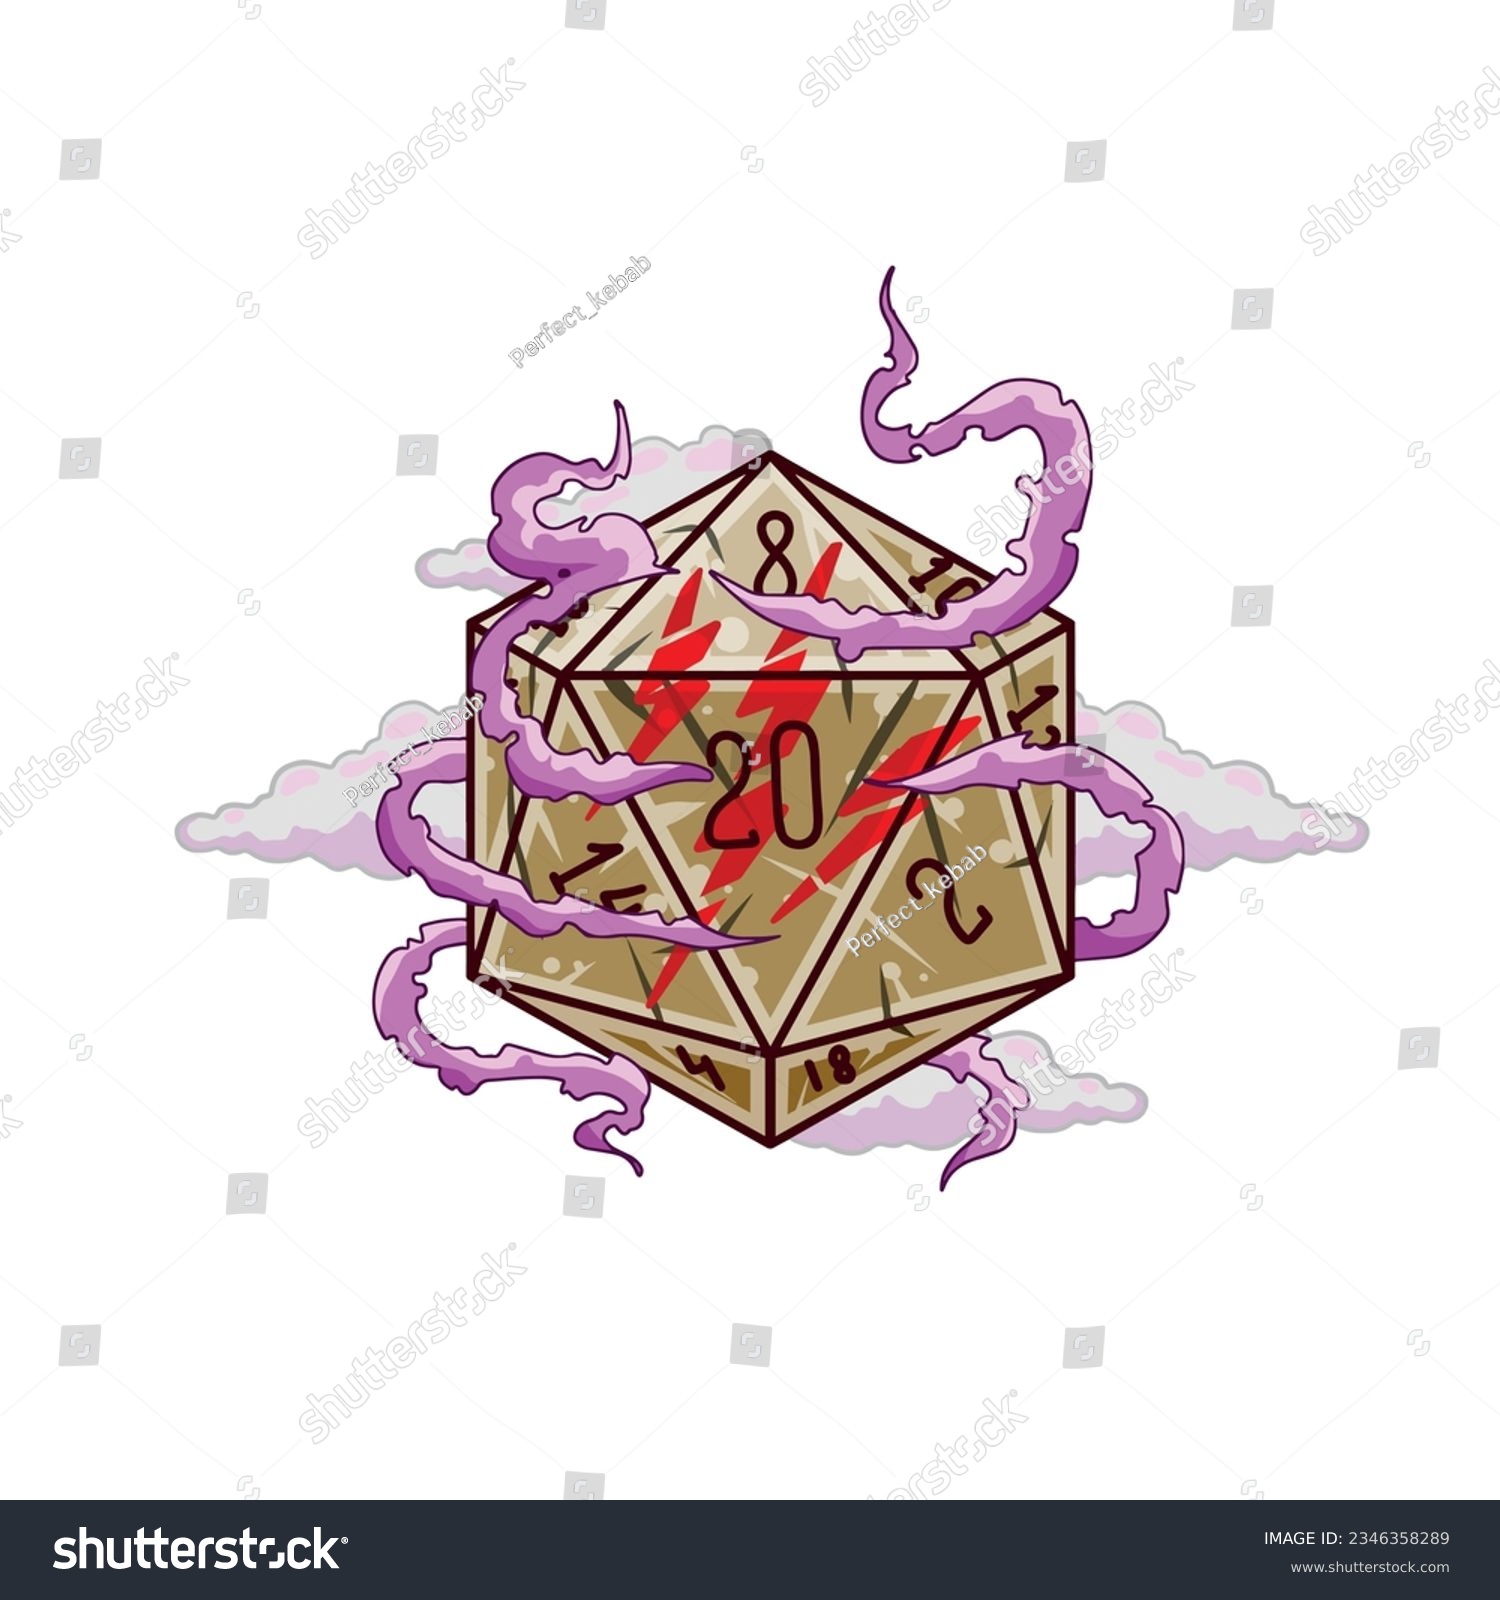 SVG of Dice d20 for playing Dnd. Dungeon and dragons board game. Cartoon outline drawn illustration. Role play gaming svg